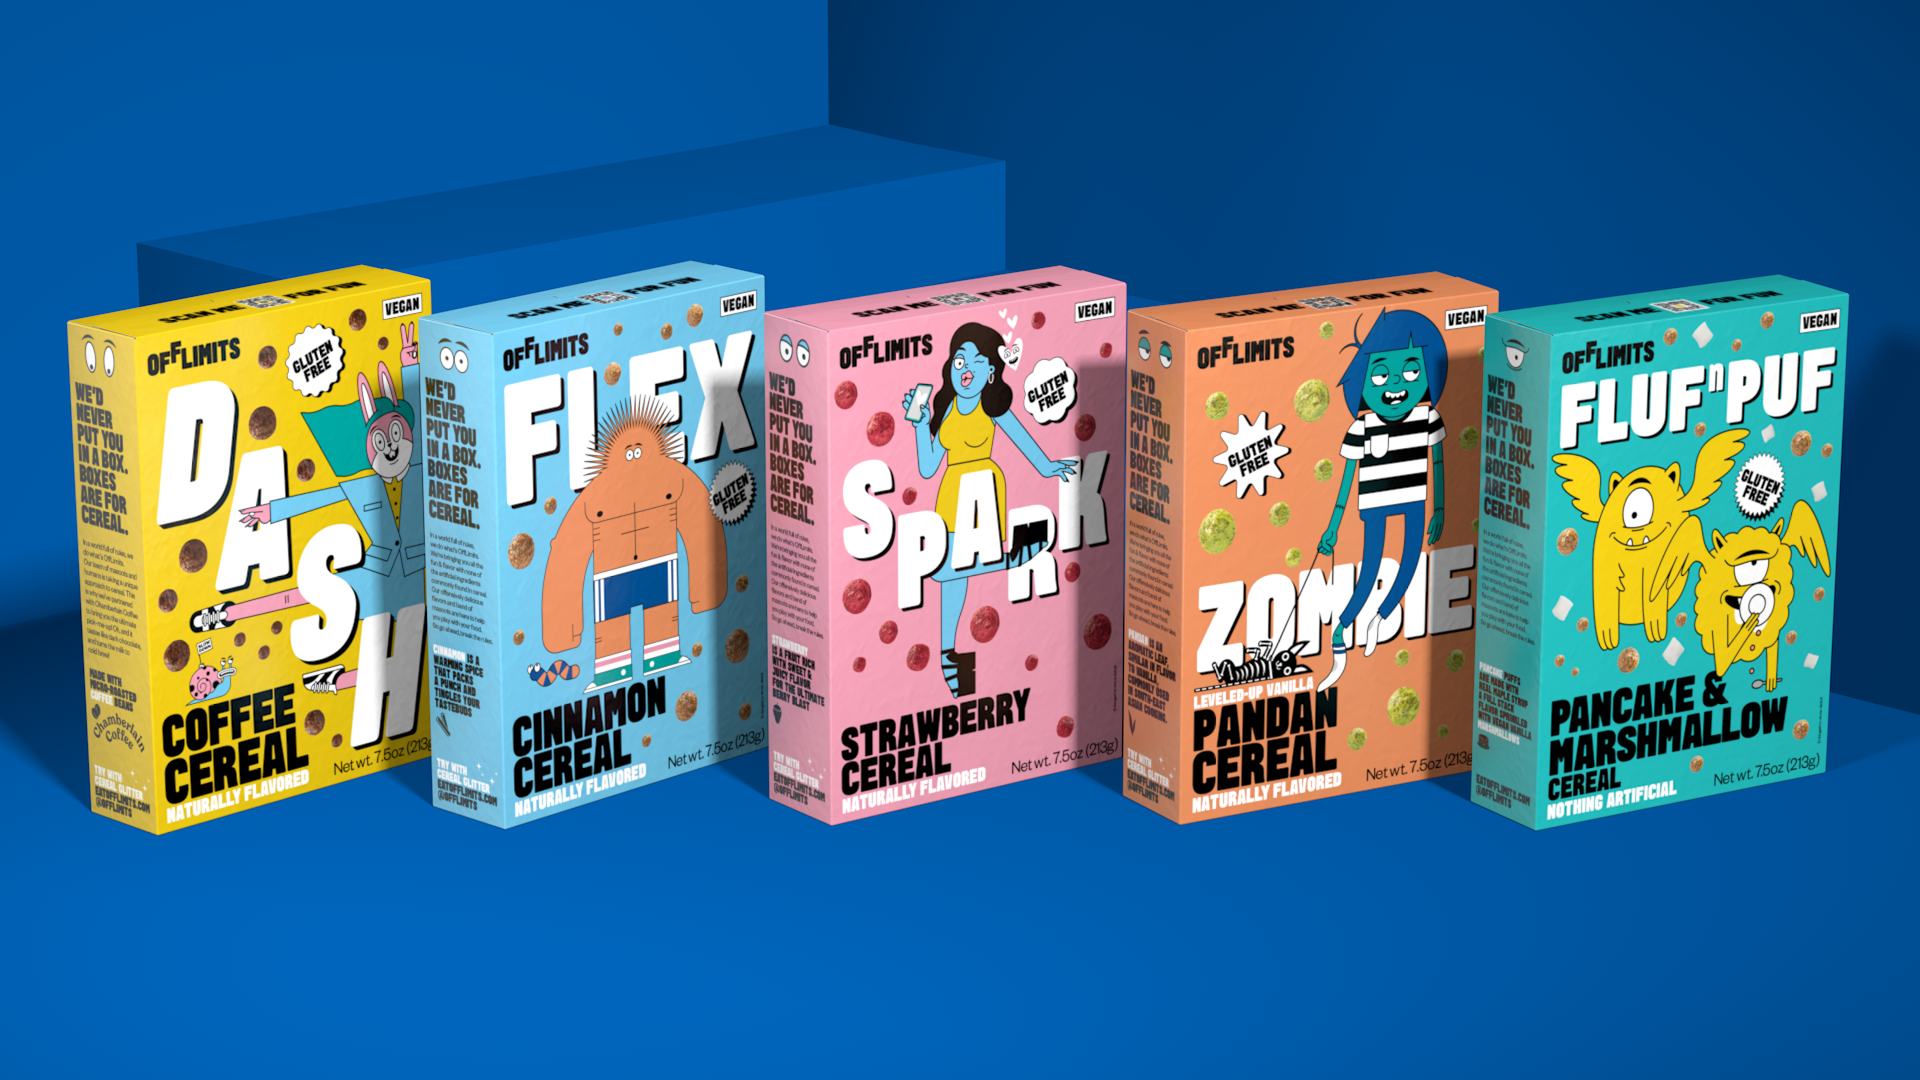 the range of OfflLimits cereal boxes standing side by side. From left to right: dash coffee cereal, flex cinnamon cereal, spark strawberry cereal, zombie pandan cereal, and fluf n puf pancake & marshmallow cereal).